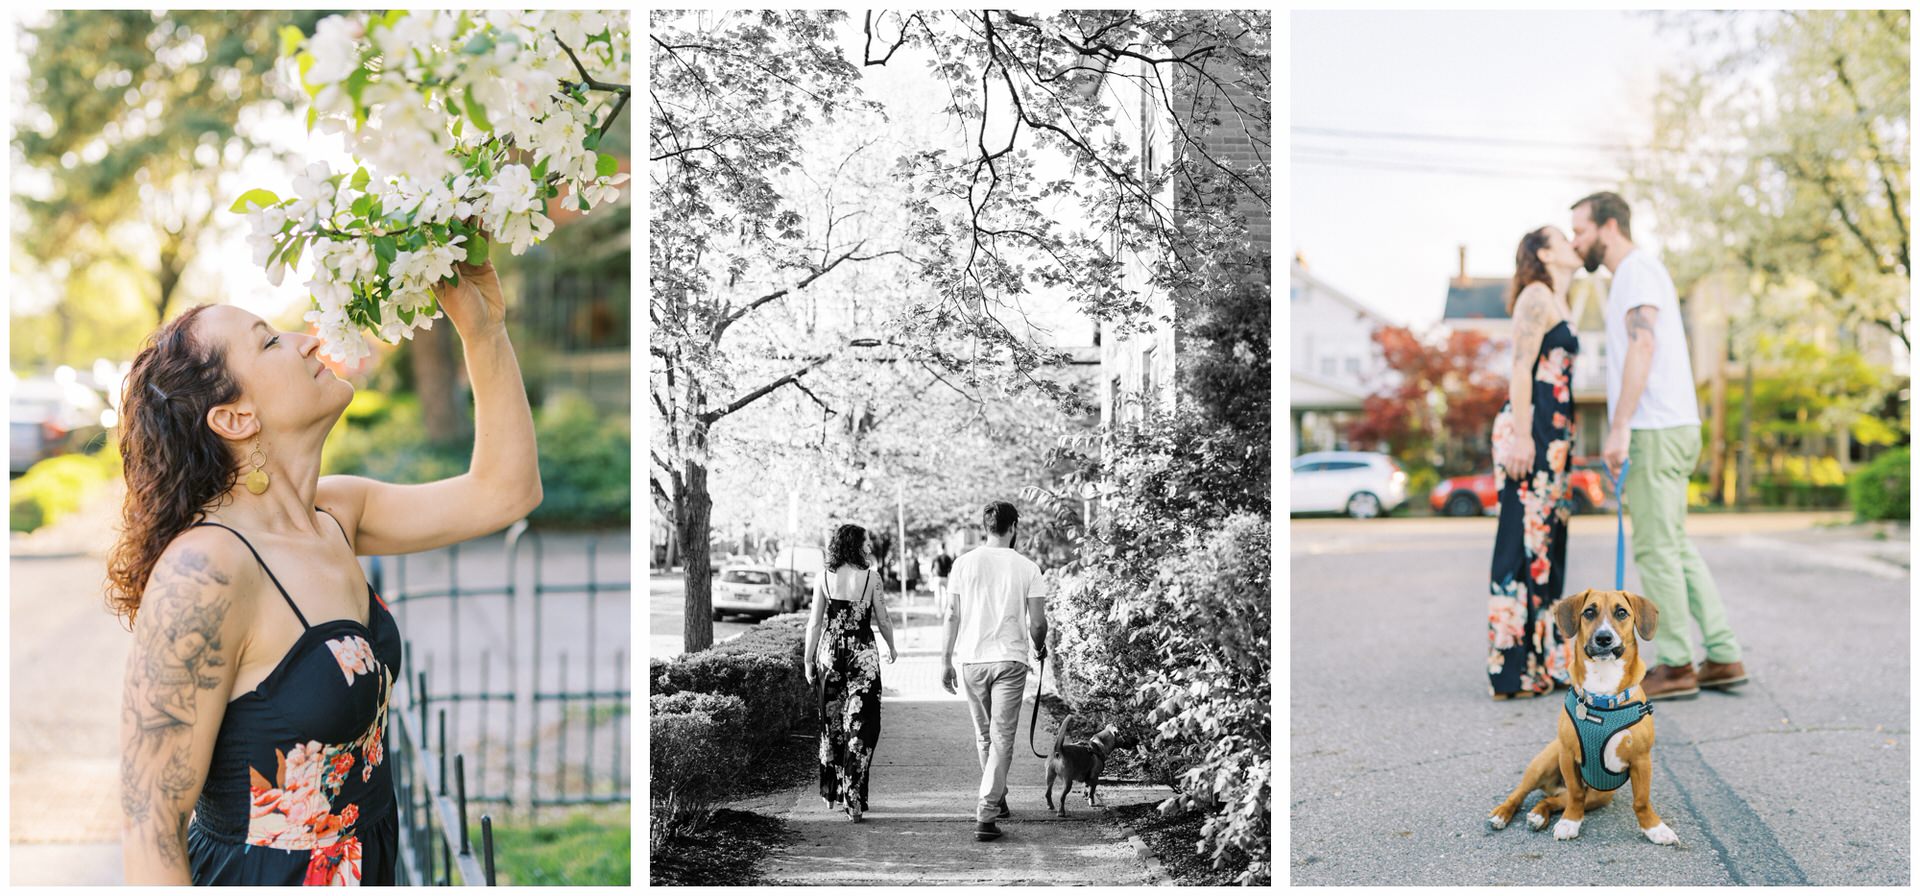 a husband and wife and their dog walk through their city neighborhood in springtime